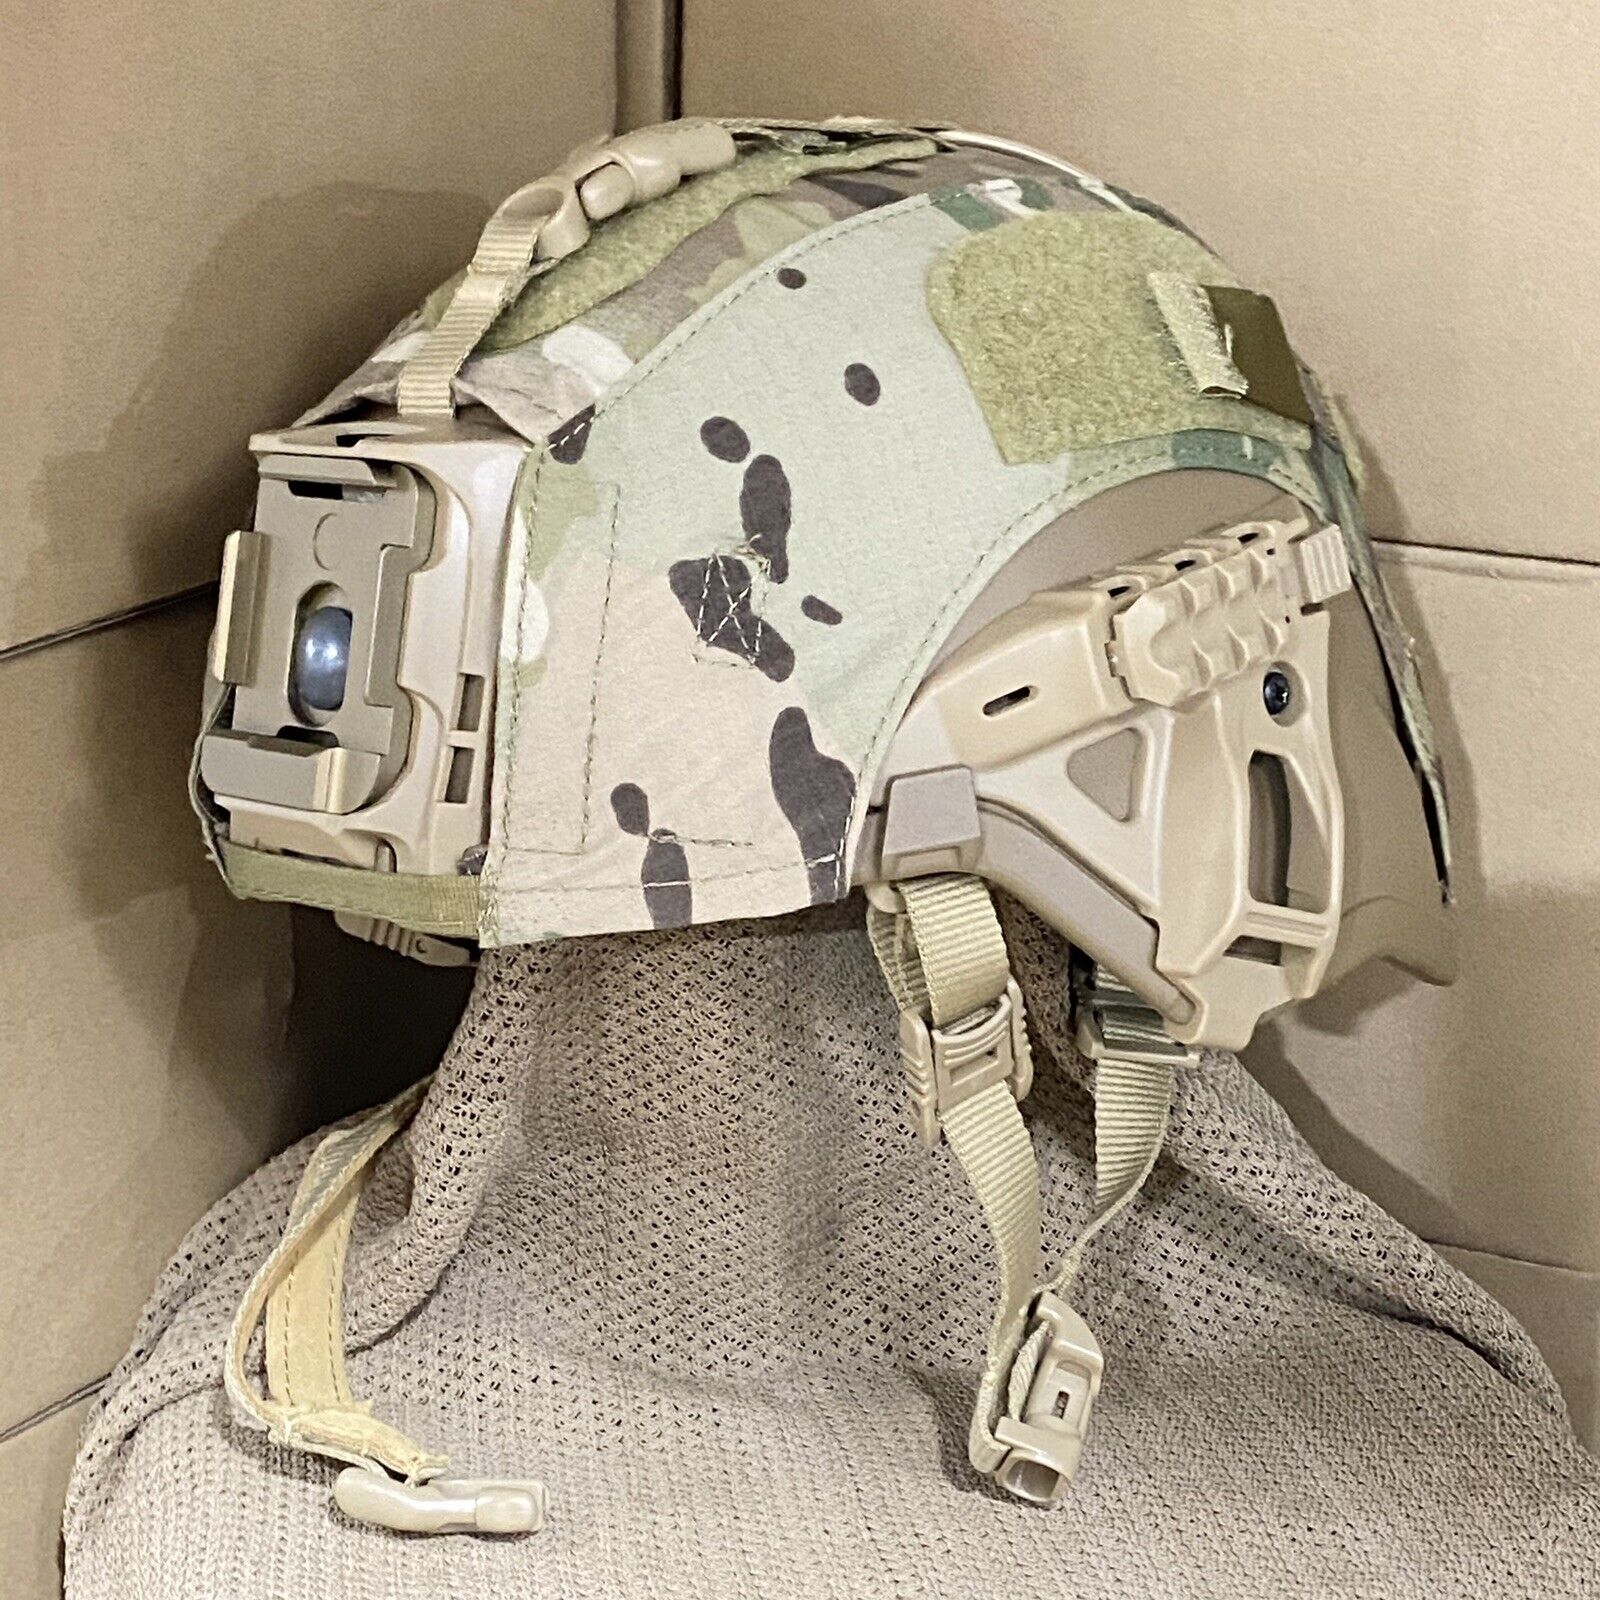 Replica Large Army Combat IHPS Integrated Head Protection System Bump Helmet New